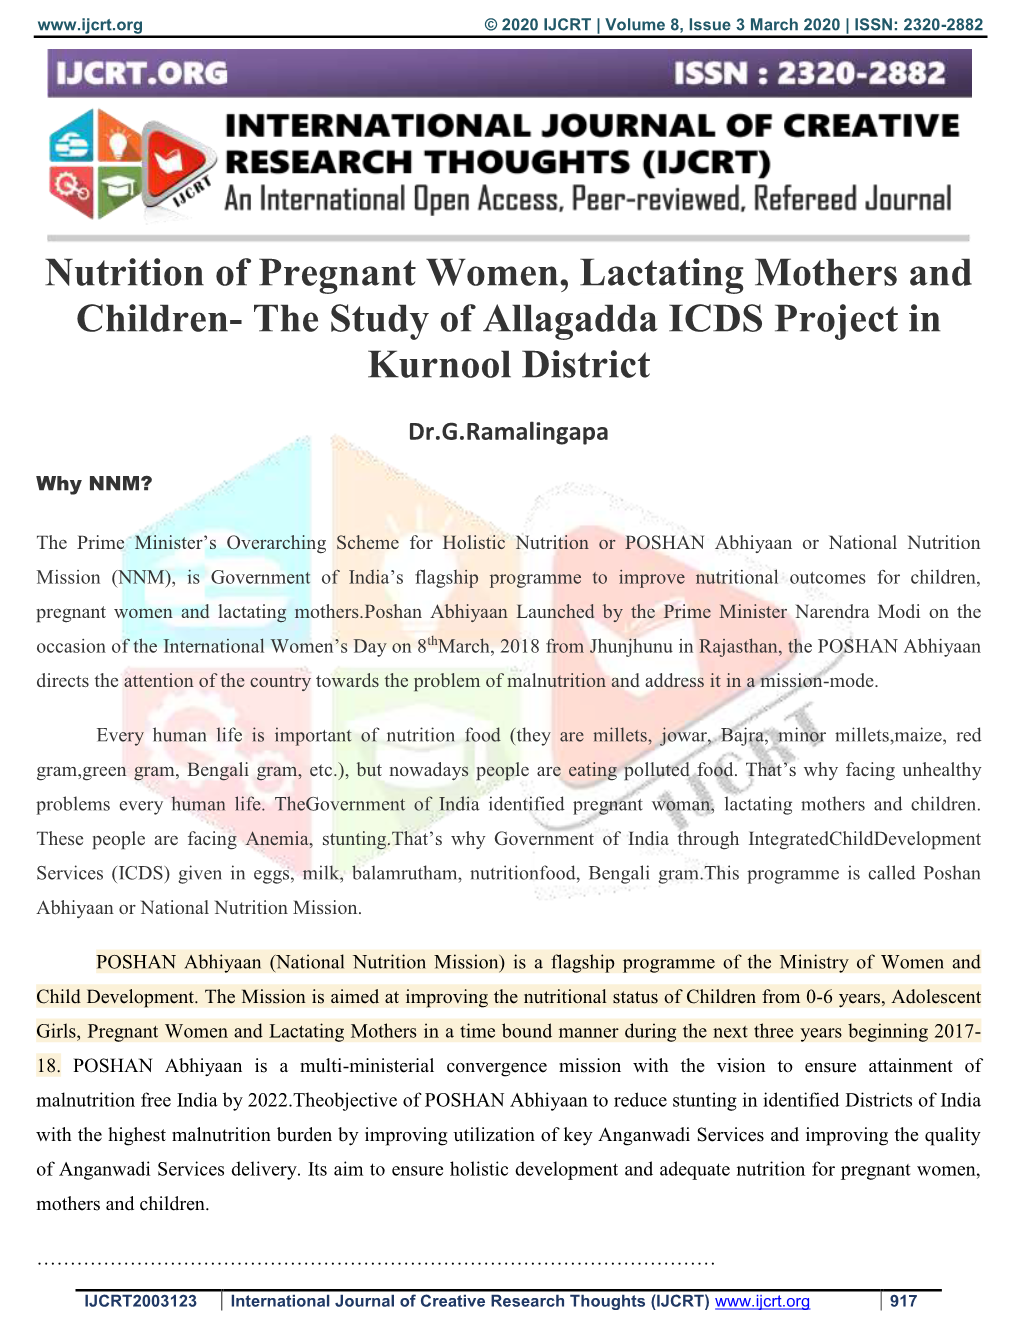 The Study of Allagadda ICDS Project in Kurnool District